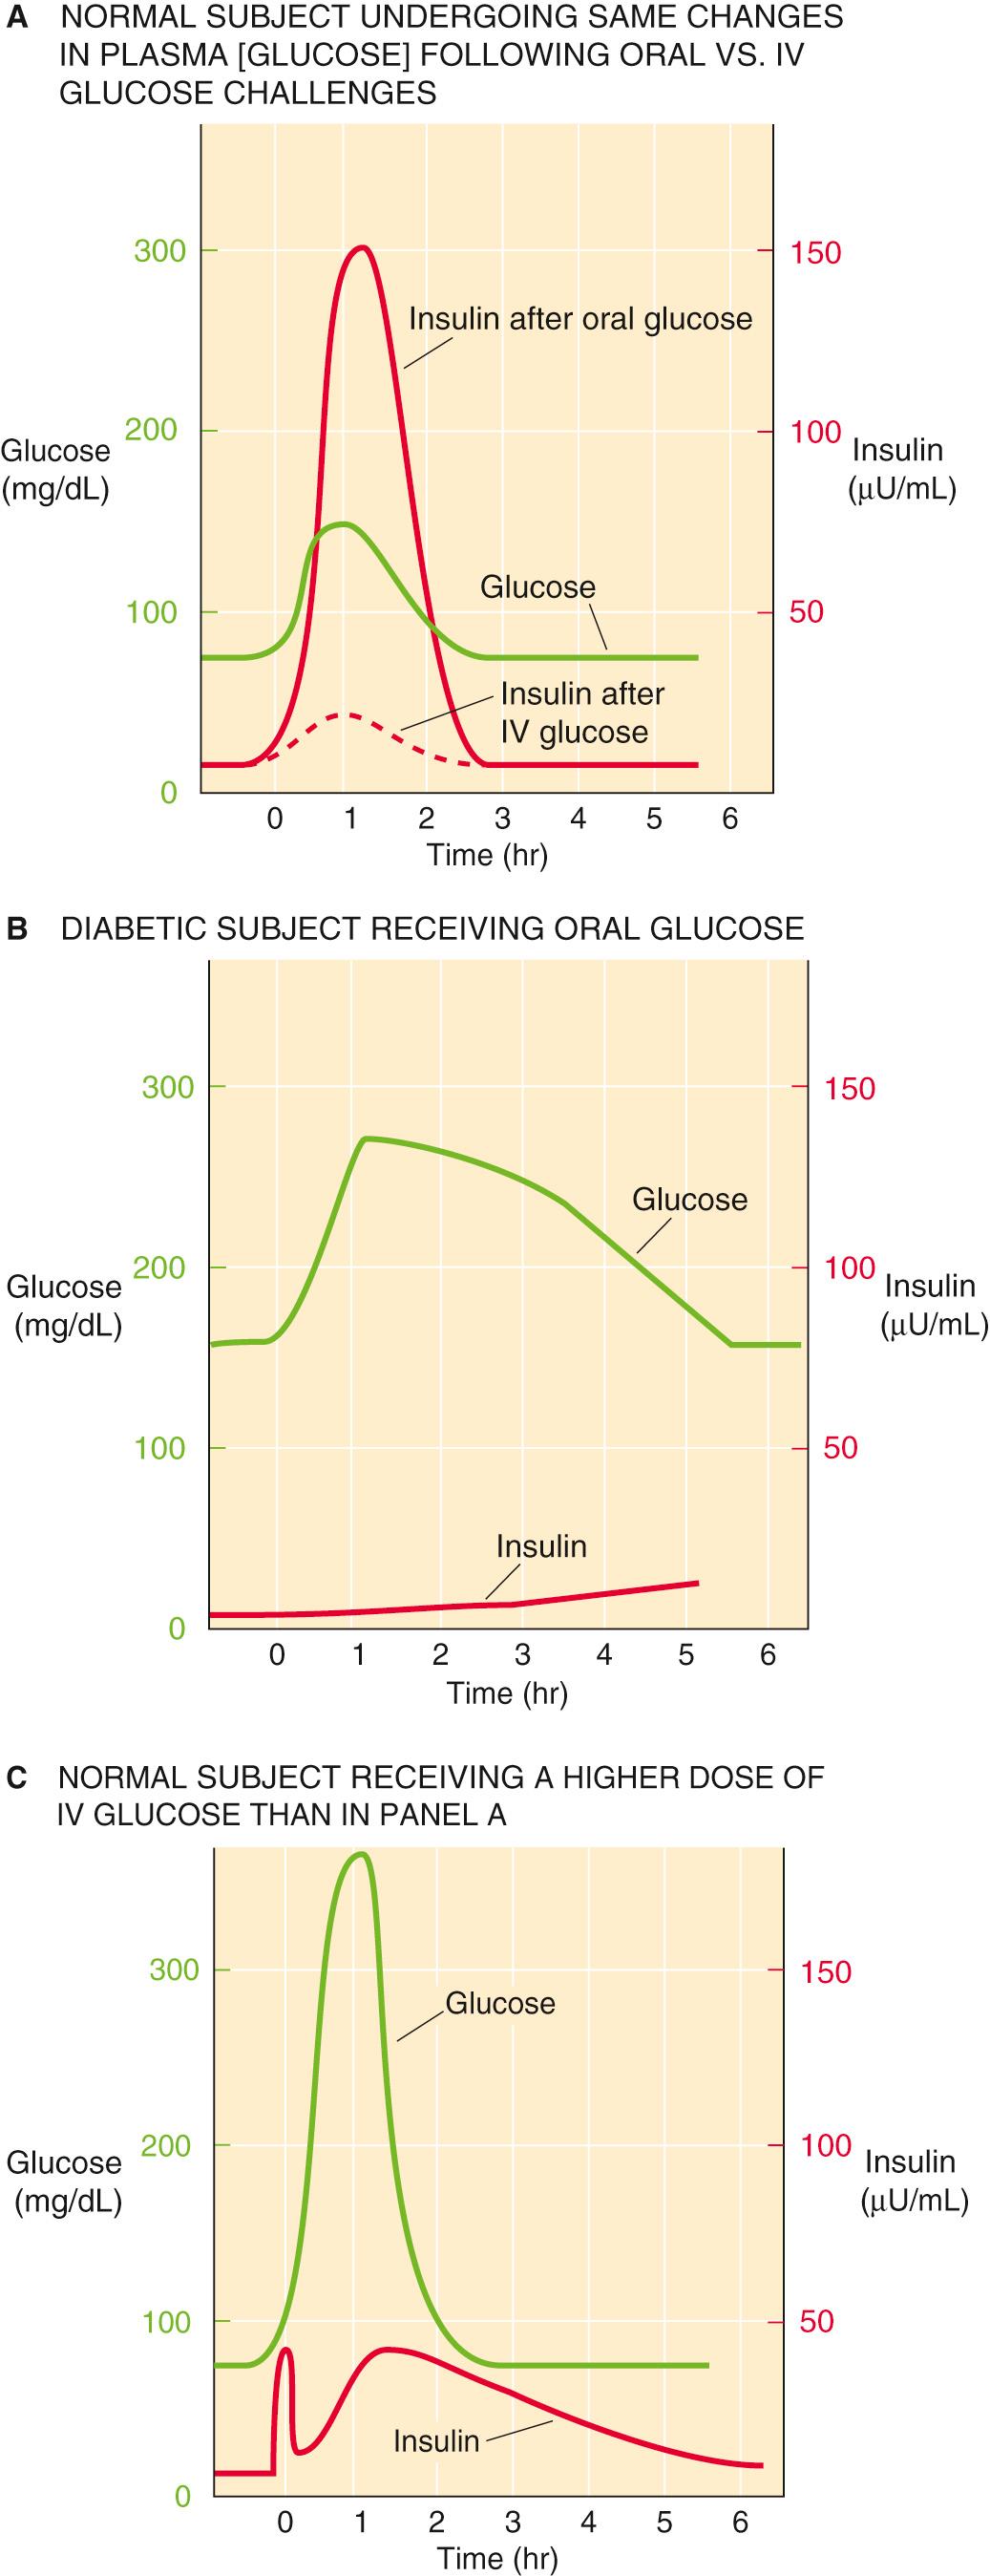 Figure 51-3, Glucose tolerance test results. A, When a person ingests a glucose meal (75 g), plasma [glucose] (green curve) rises slowly, reflecting intestinal uptake of glucose. As a result, plasma [insulin] ( solid red curve) rises sharply. When a lower glucose dose is given intravenously (IV) over time—in a manner that reproduces the green curve—plasma [insulin] rises only modestly (dashed red curve). The difference between the insulin responses indicated by the solid and dashed red lines is due to the “incretin effect” of oral glucose ingestion. B, In a patient with type 1 diabetes, the same oral glucose load as that in A causes plasma [glucose] to rise to a higher level and to remain high for a longer time. The diagnosis of diabetes is made if the plasma glucose level is above 200 mg/dL at the second hour. C, If a large IV glucose challenge (0.5 g glucose/kg body weight given as a 25% glucose solution) is administered as a bolus, plasma [glucose] rises much more rapidly than it does with an oral glucose load. Sensing a rapid rise in [glucose], the β cells first secrete some of their stores of presynthesized insulin. Following this “acute phase,” the cells secrete both presynthesized and newly manufactured insulin in the “chronic phase.”